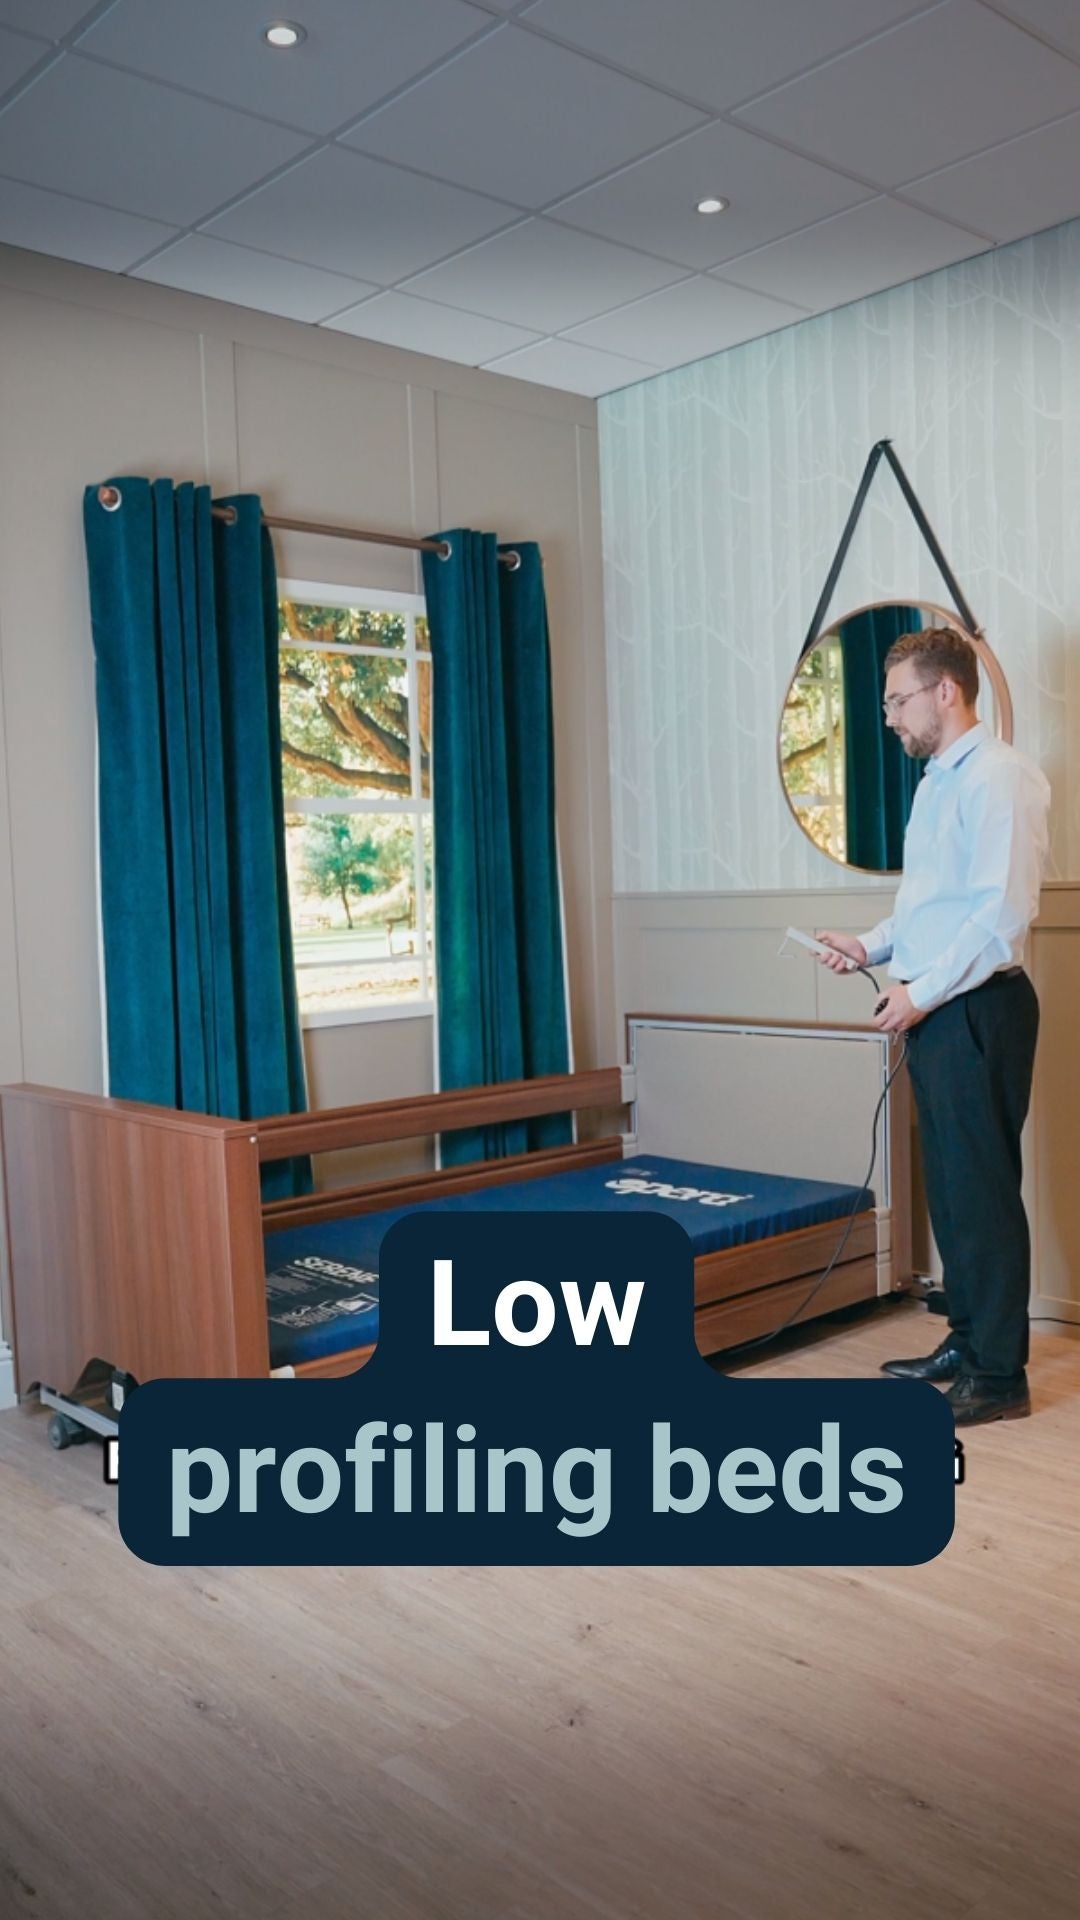 A man stood next to a low profiling bed with the caption 'Low profiling beds'